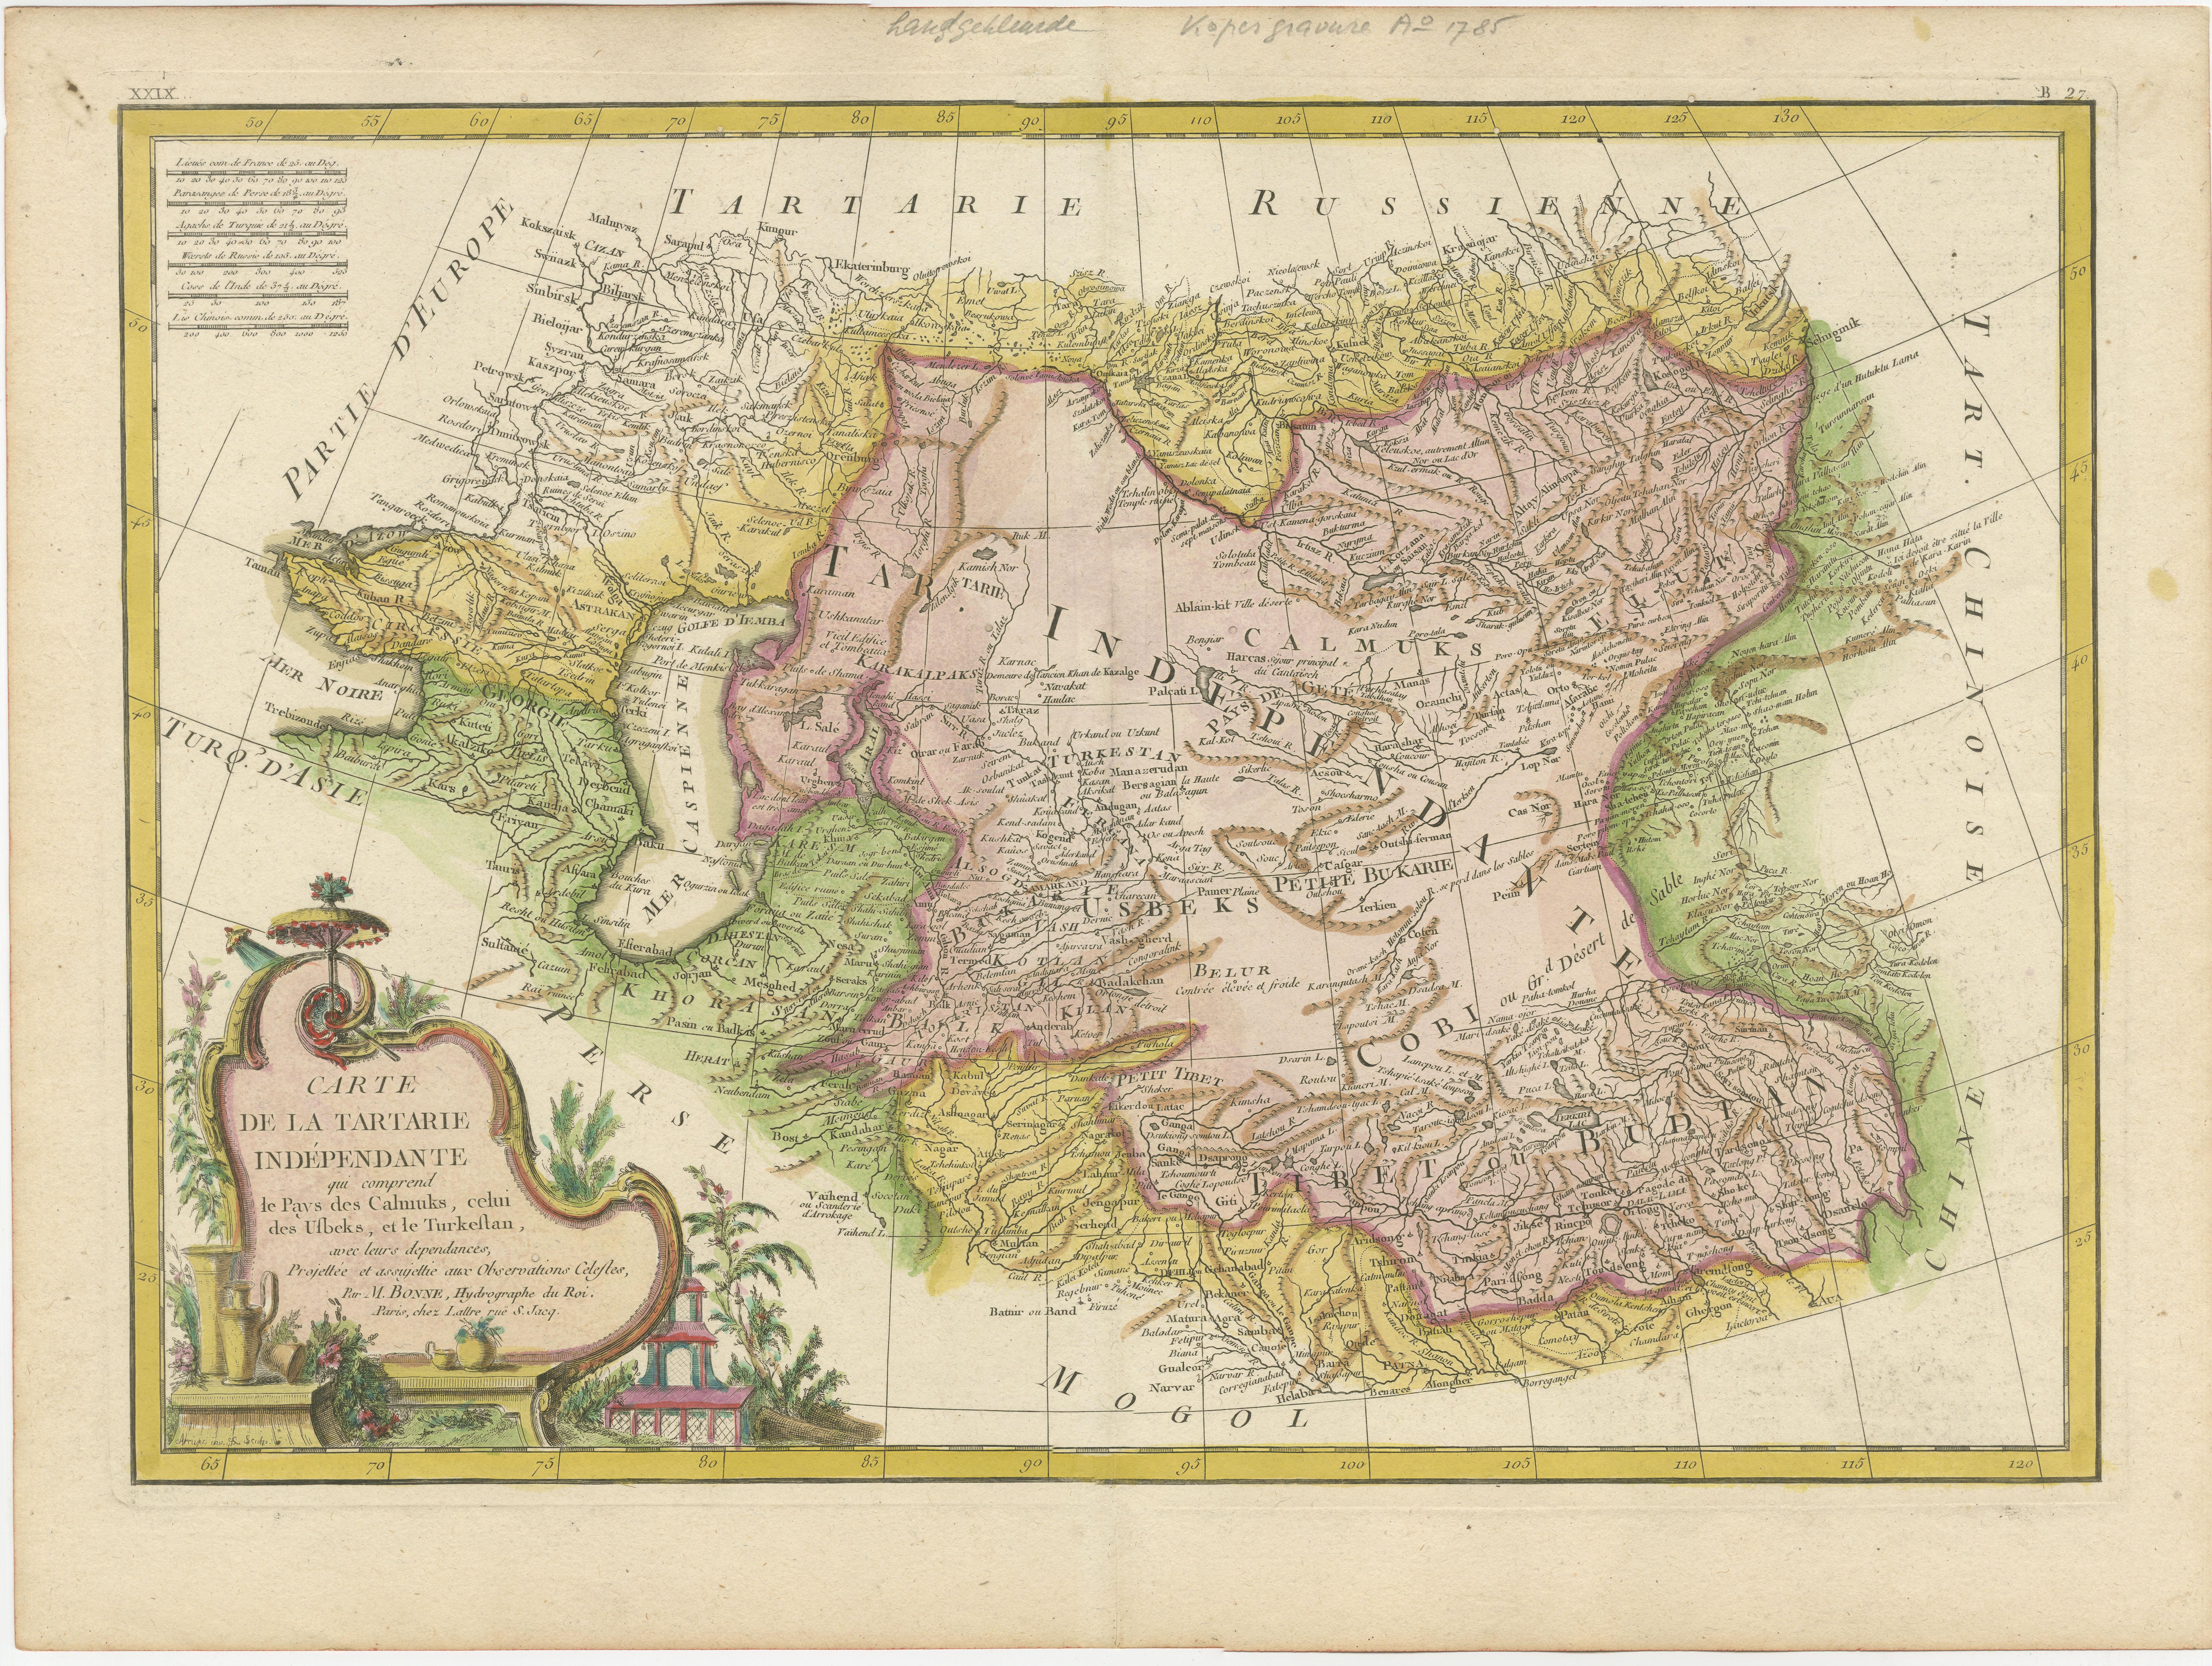 Antique map titled 'Carte de la Tartarie Indépendante (..)'. Decorative map of Central Asia (Tartary). Covers from the Black Sea south to China, north to Russia, and south to Persia and India. Drawn by R. Bonne for Jean Lattre's 'Atlas Moderne'